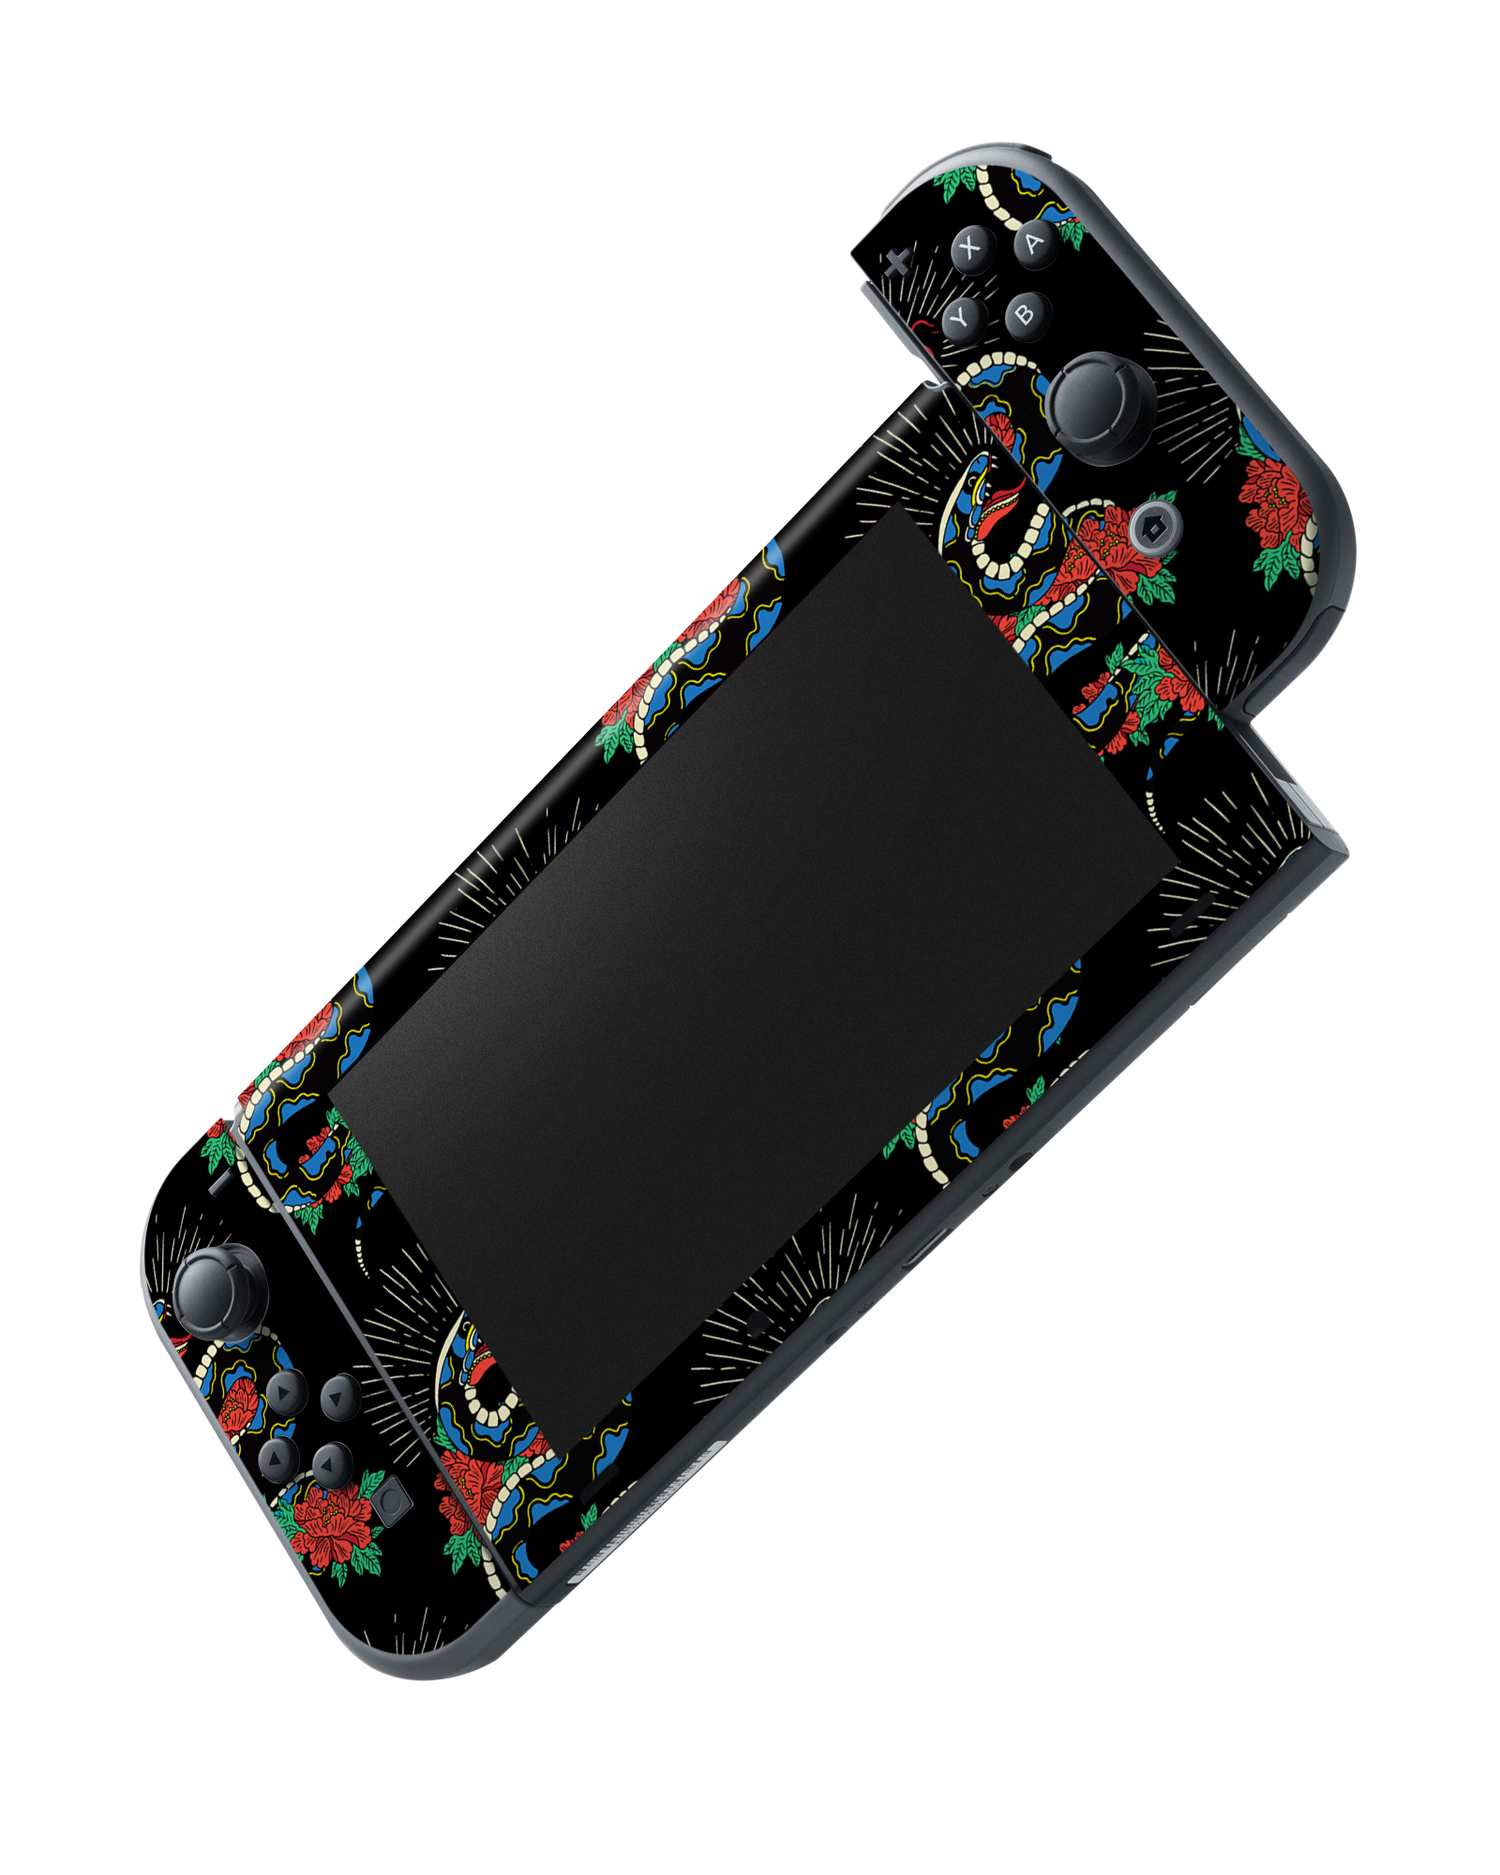 Repeating Snakes 2 Console Skin for Nintendo Switch: Joy-Con removing 